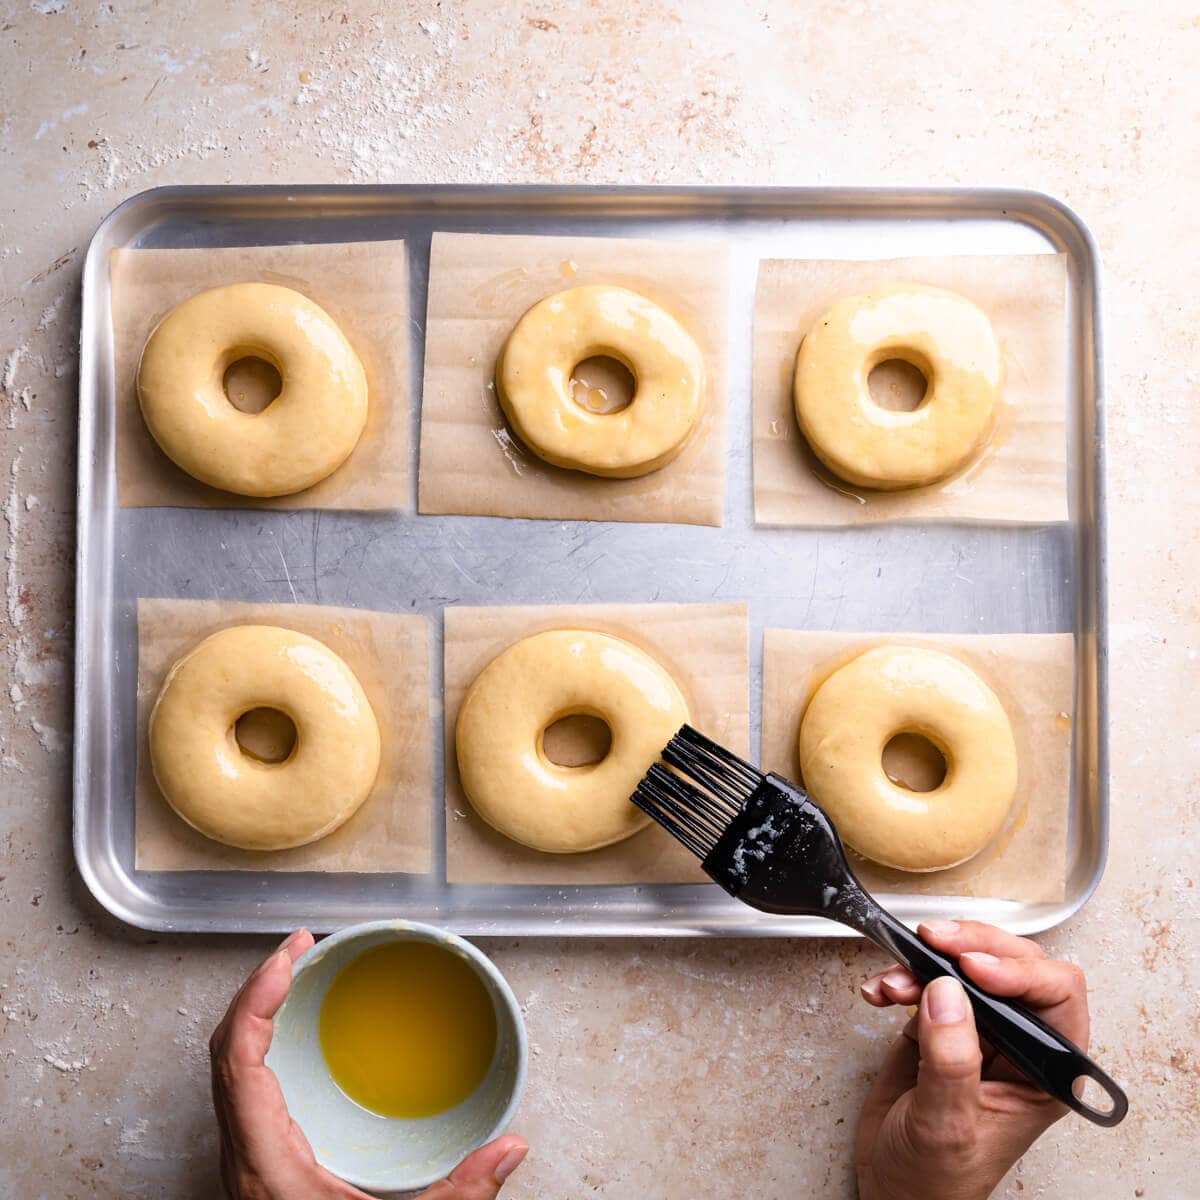 unbaked doughnuts being brushed with melted butter.